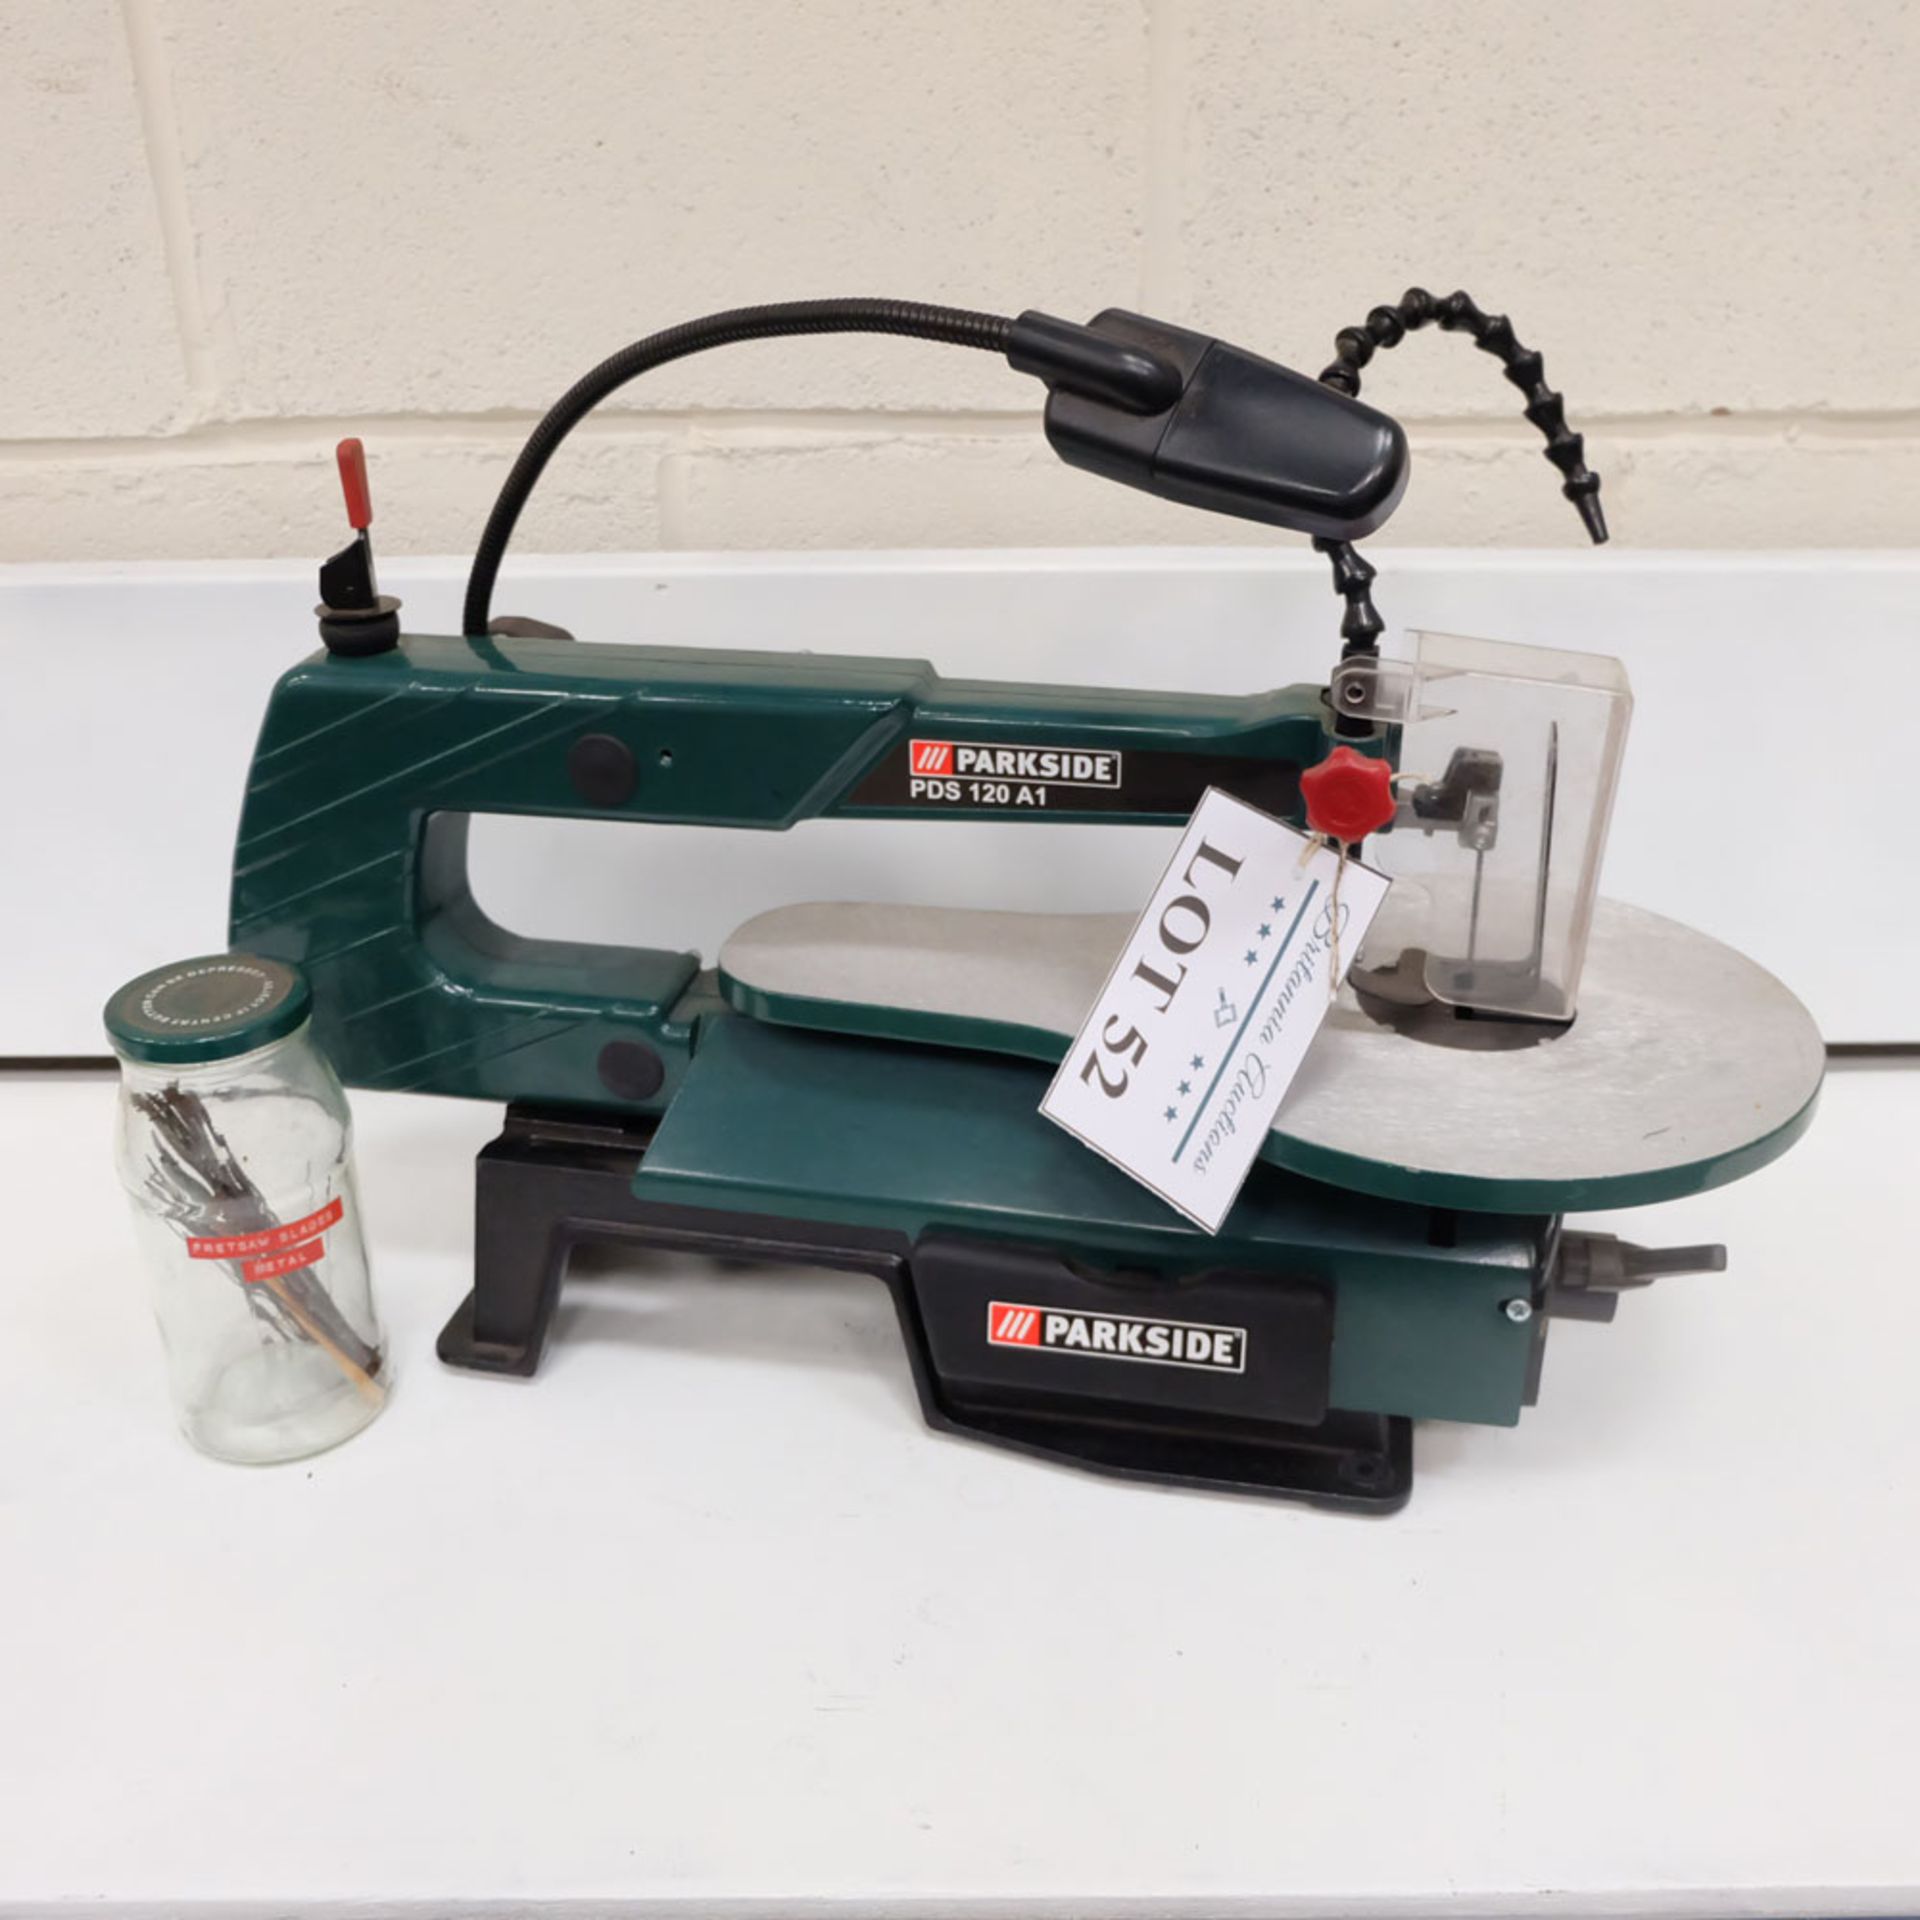 PARKSIDE Model PDS 120 A1 Bench Top Scroll Saw with Light and Spare Blades.